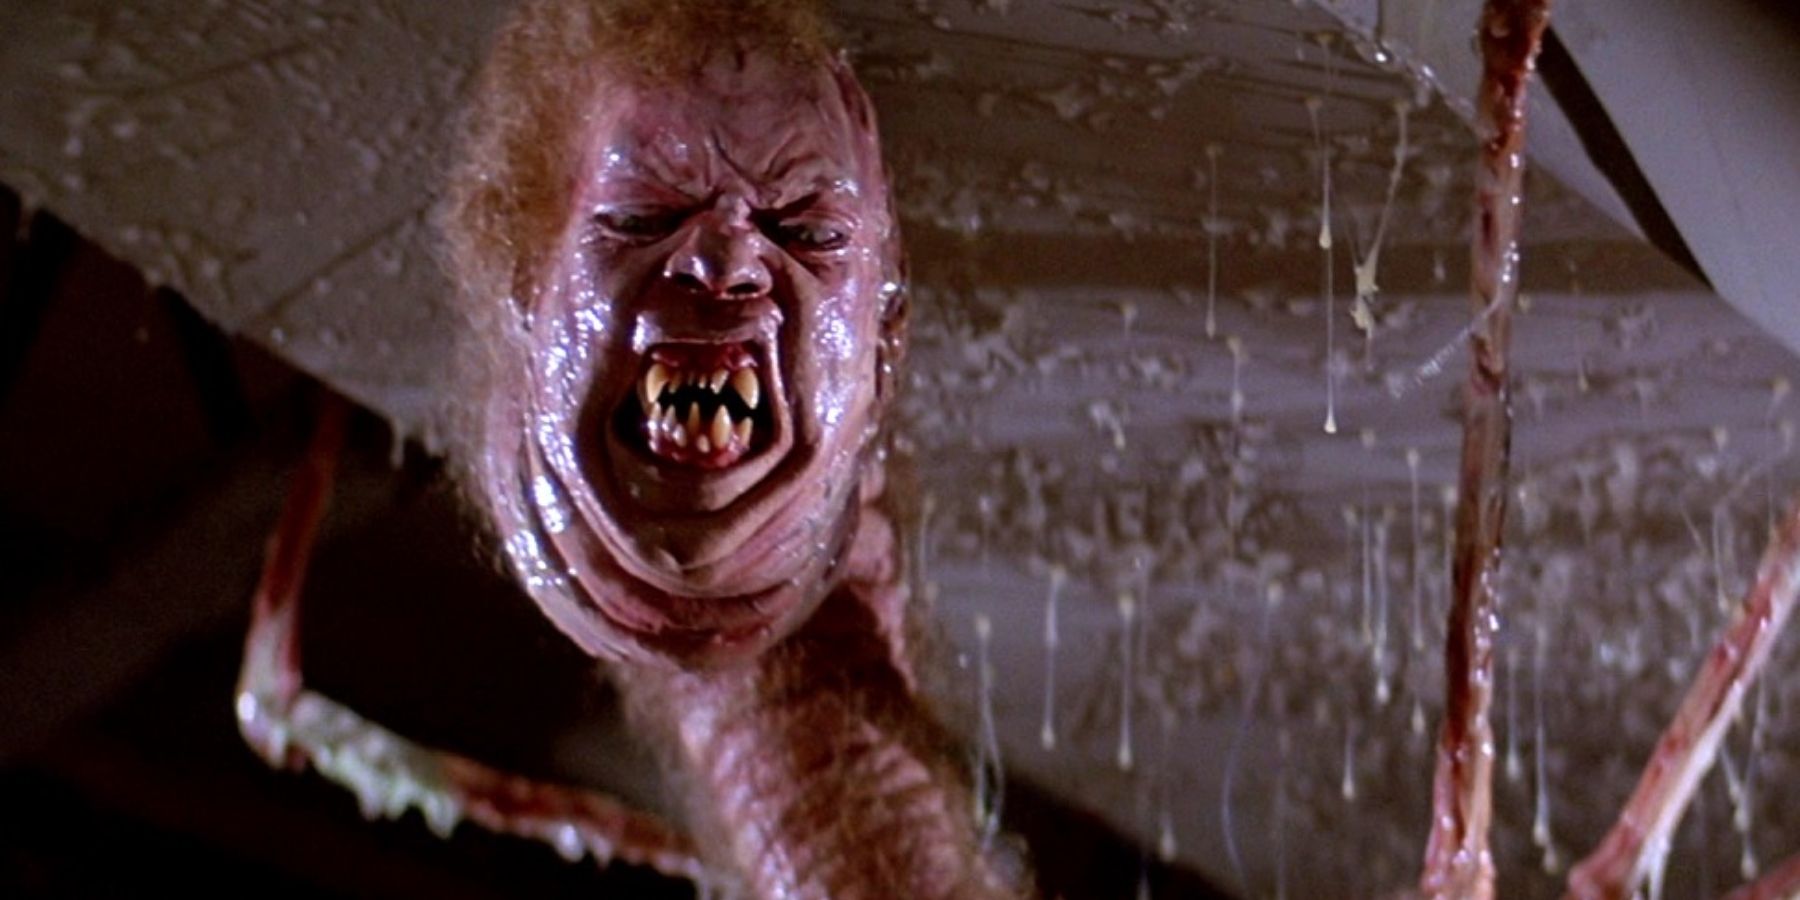 The Thing (1982) – WTF Happened to This Horror Movie?